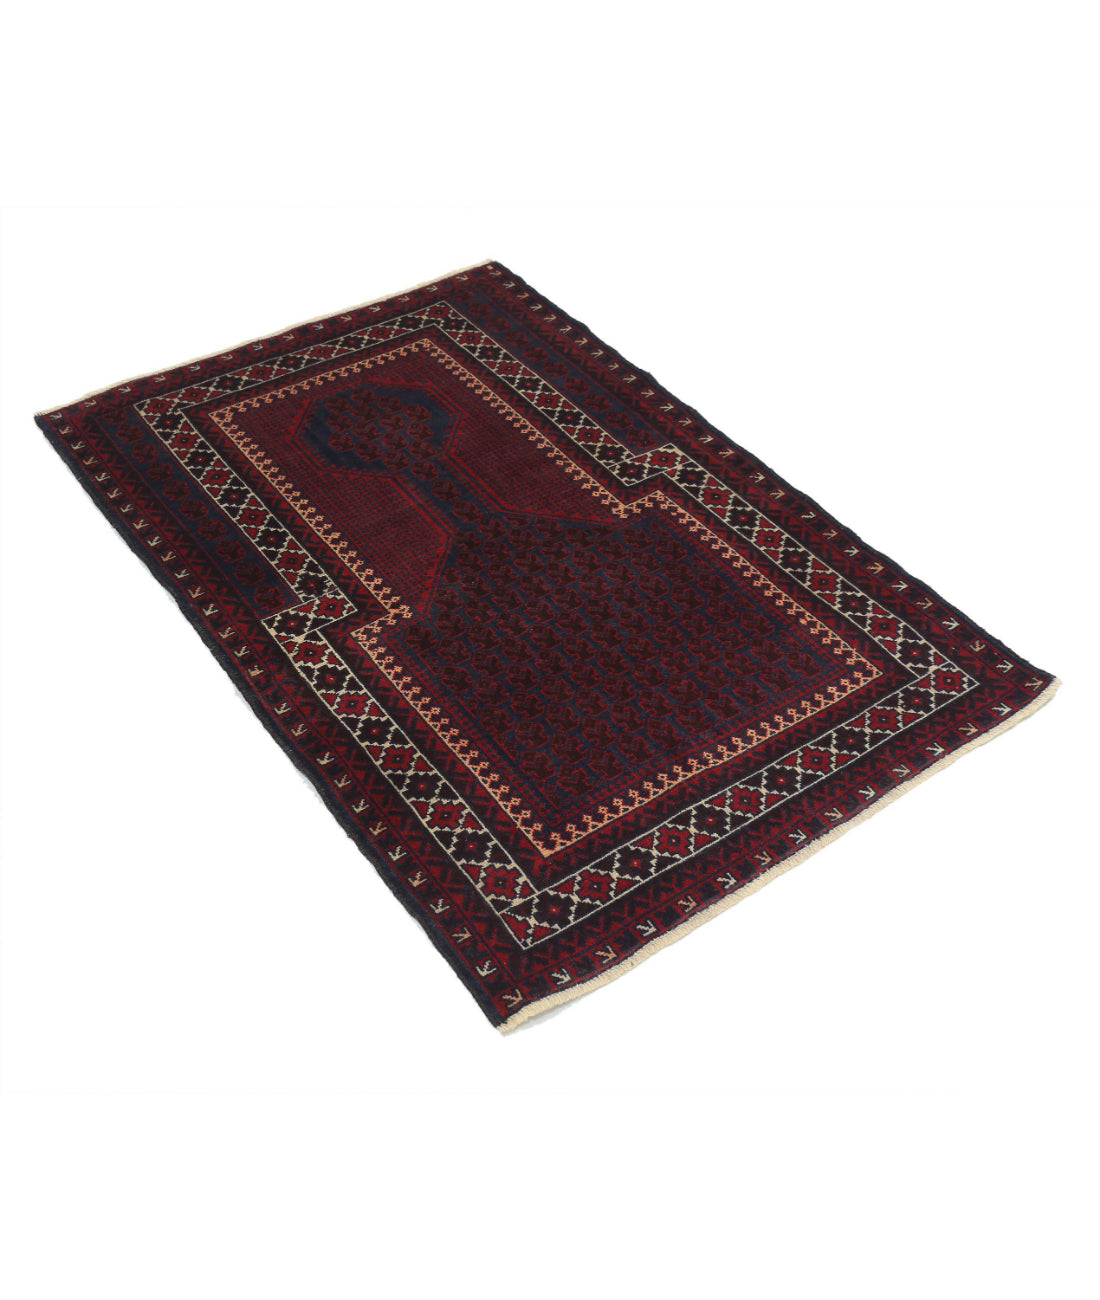 Baluch 3'0'' X 4'5'' Hand-Knotted Wool Rug 3'0'' x 4'5'' (90 X 133) / Red / N/A